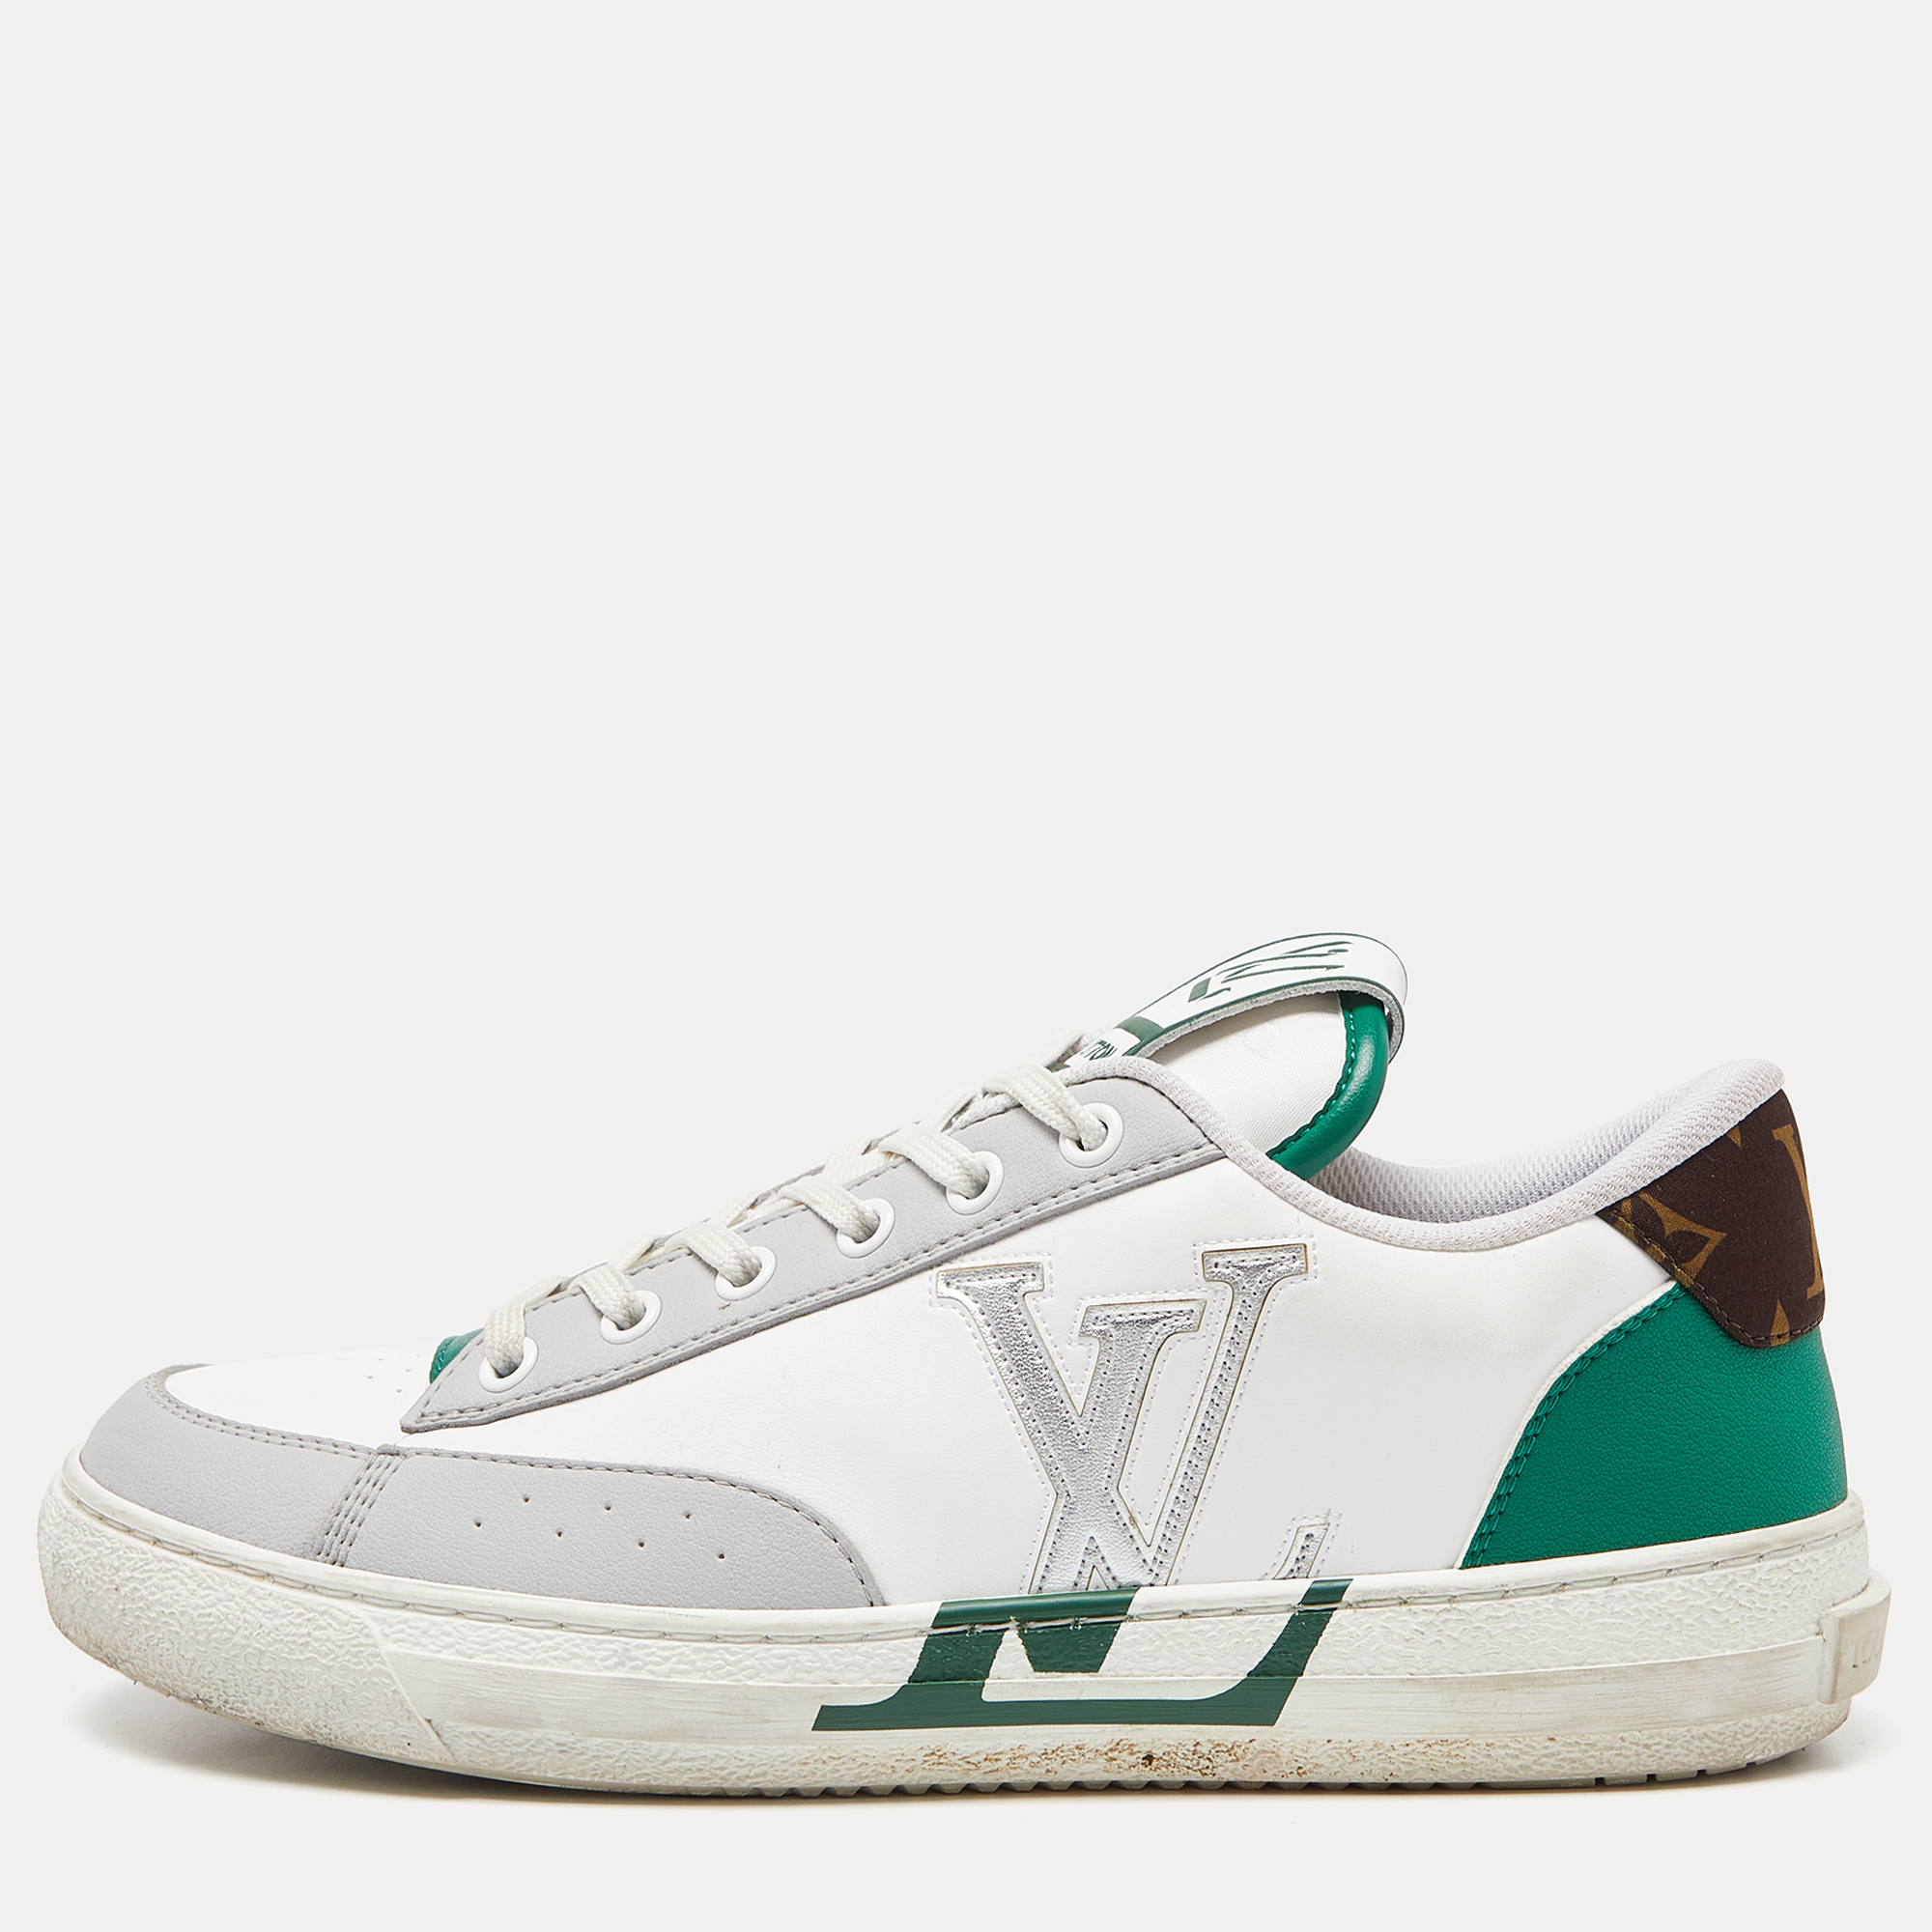 Pre-owned Louis Vuitton White/green Leather Charlie Sneakers Size 39